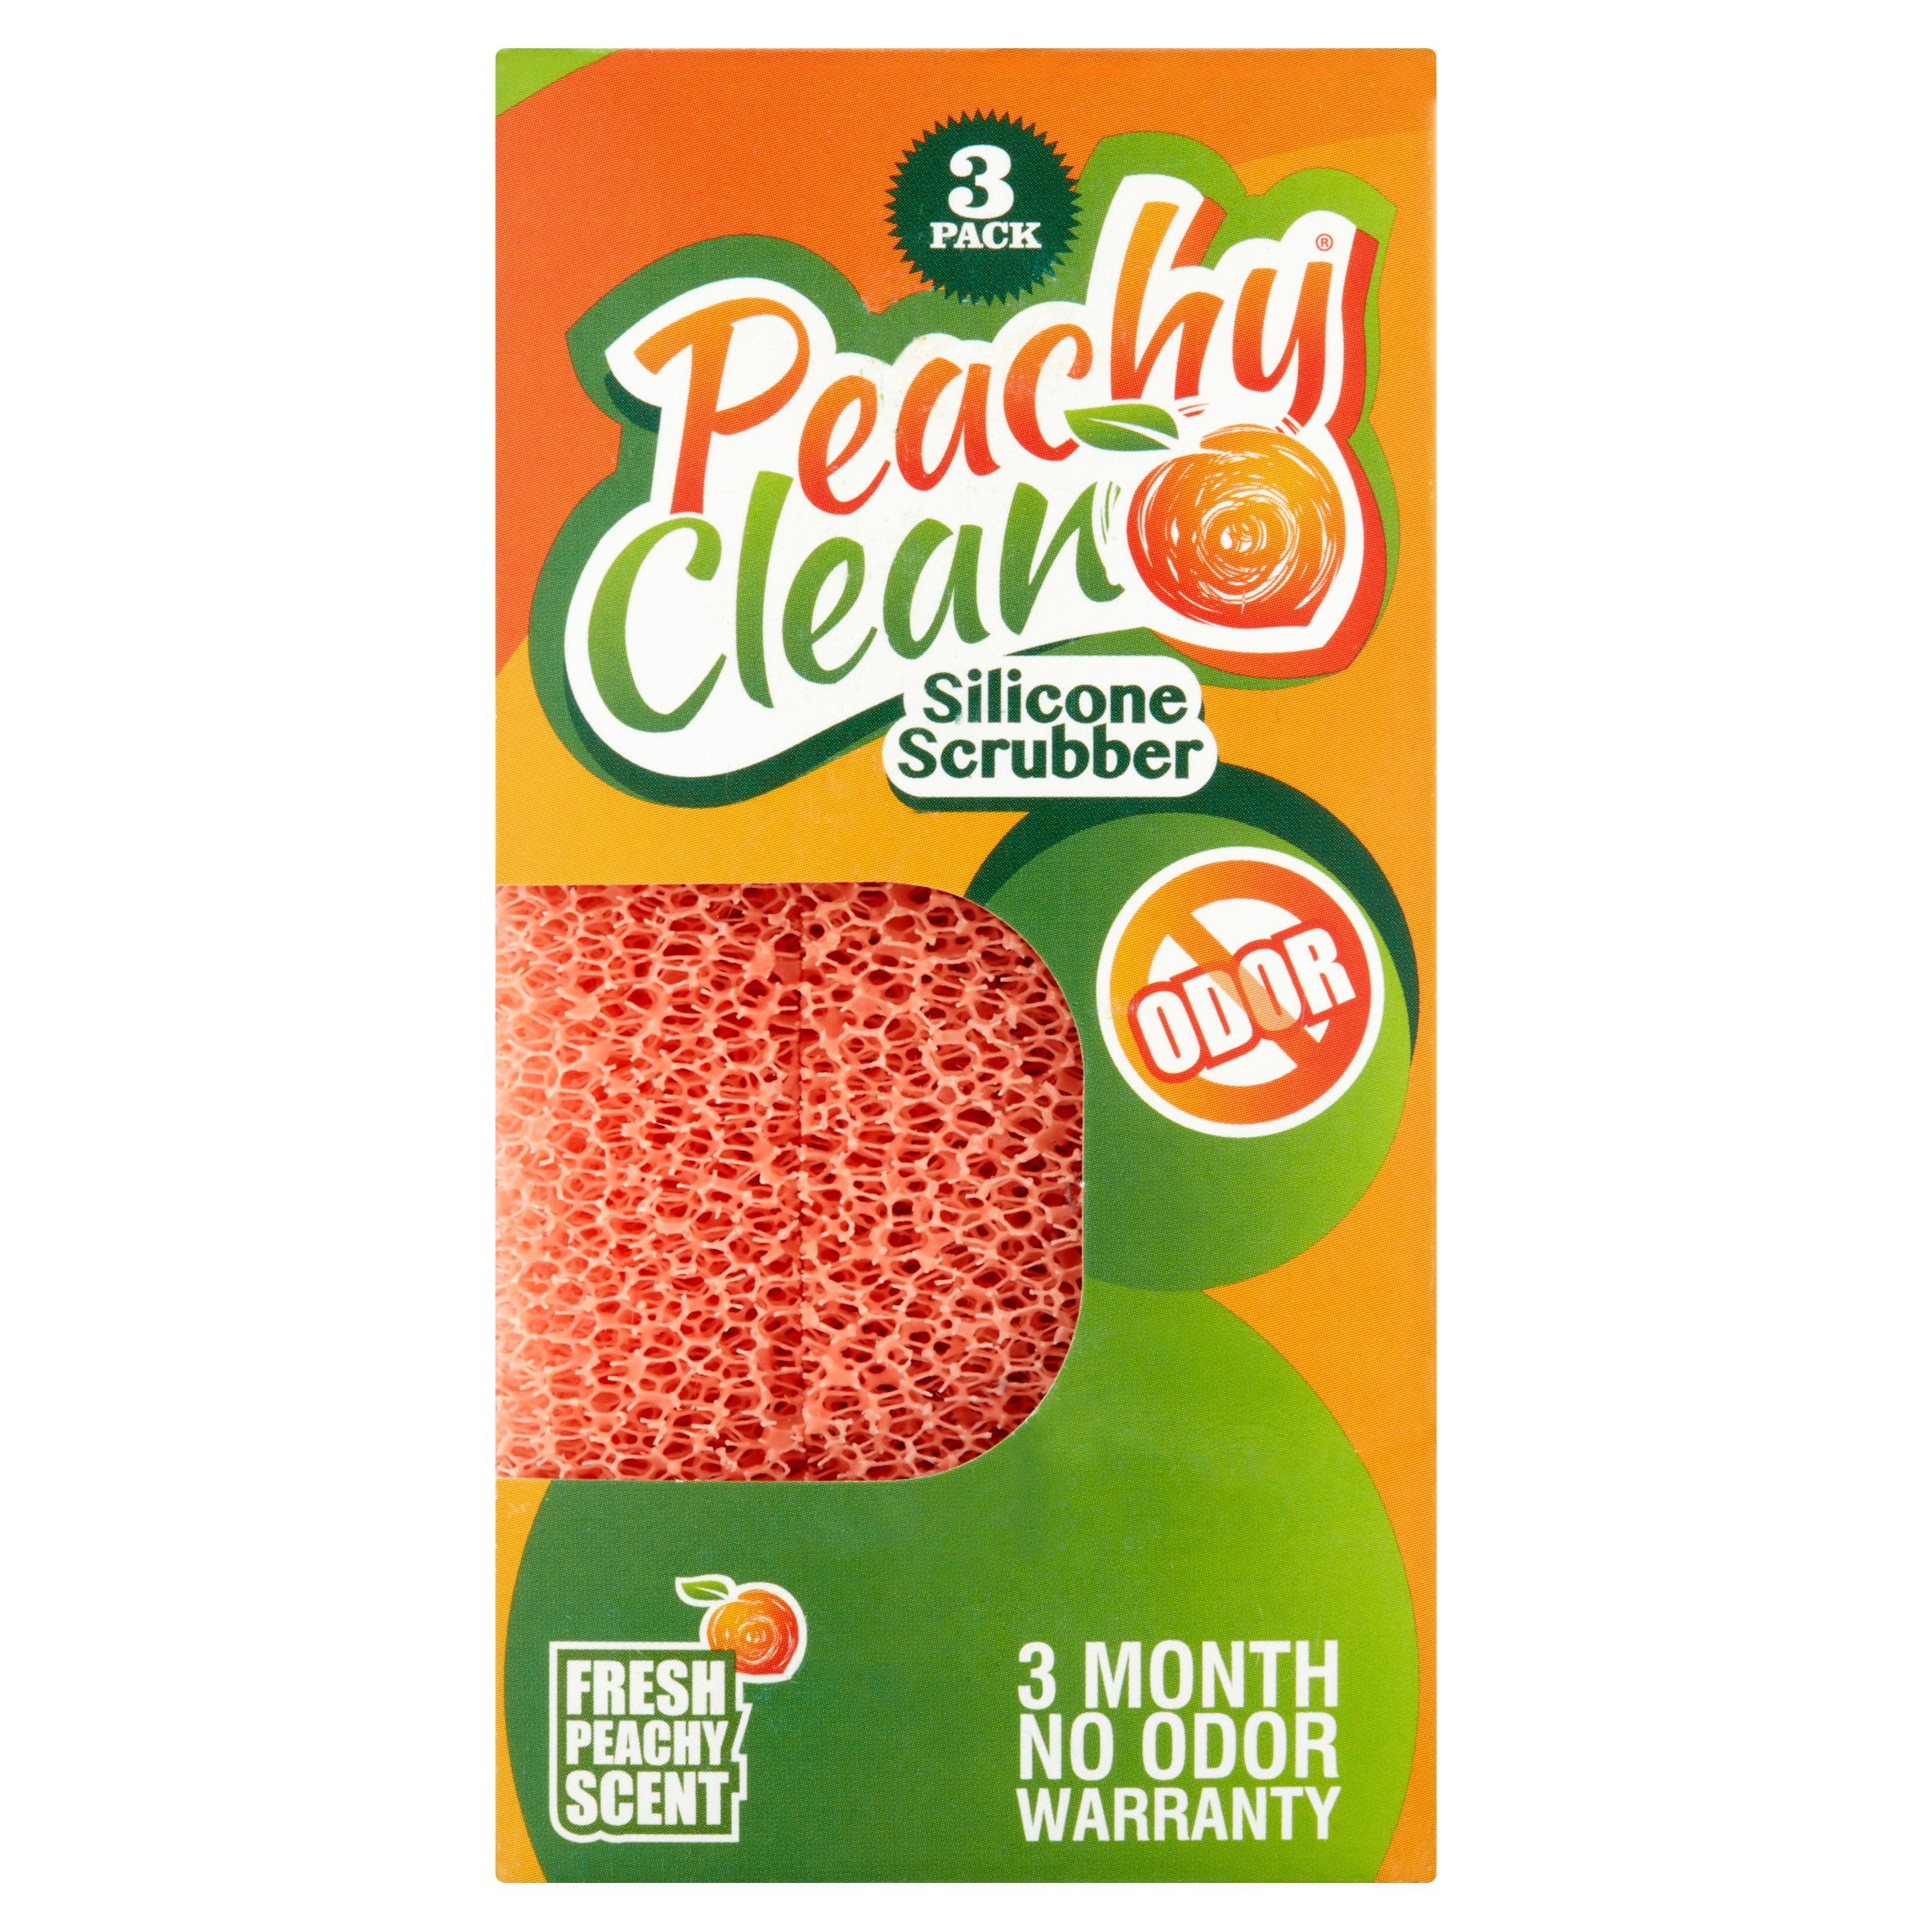 Peachy Clean Scrubber Review (Tested, Photos)